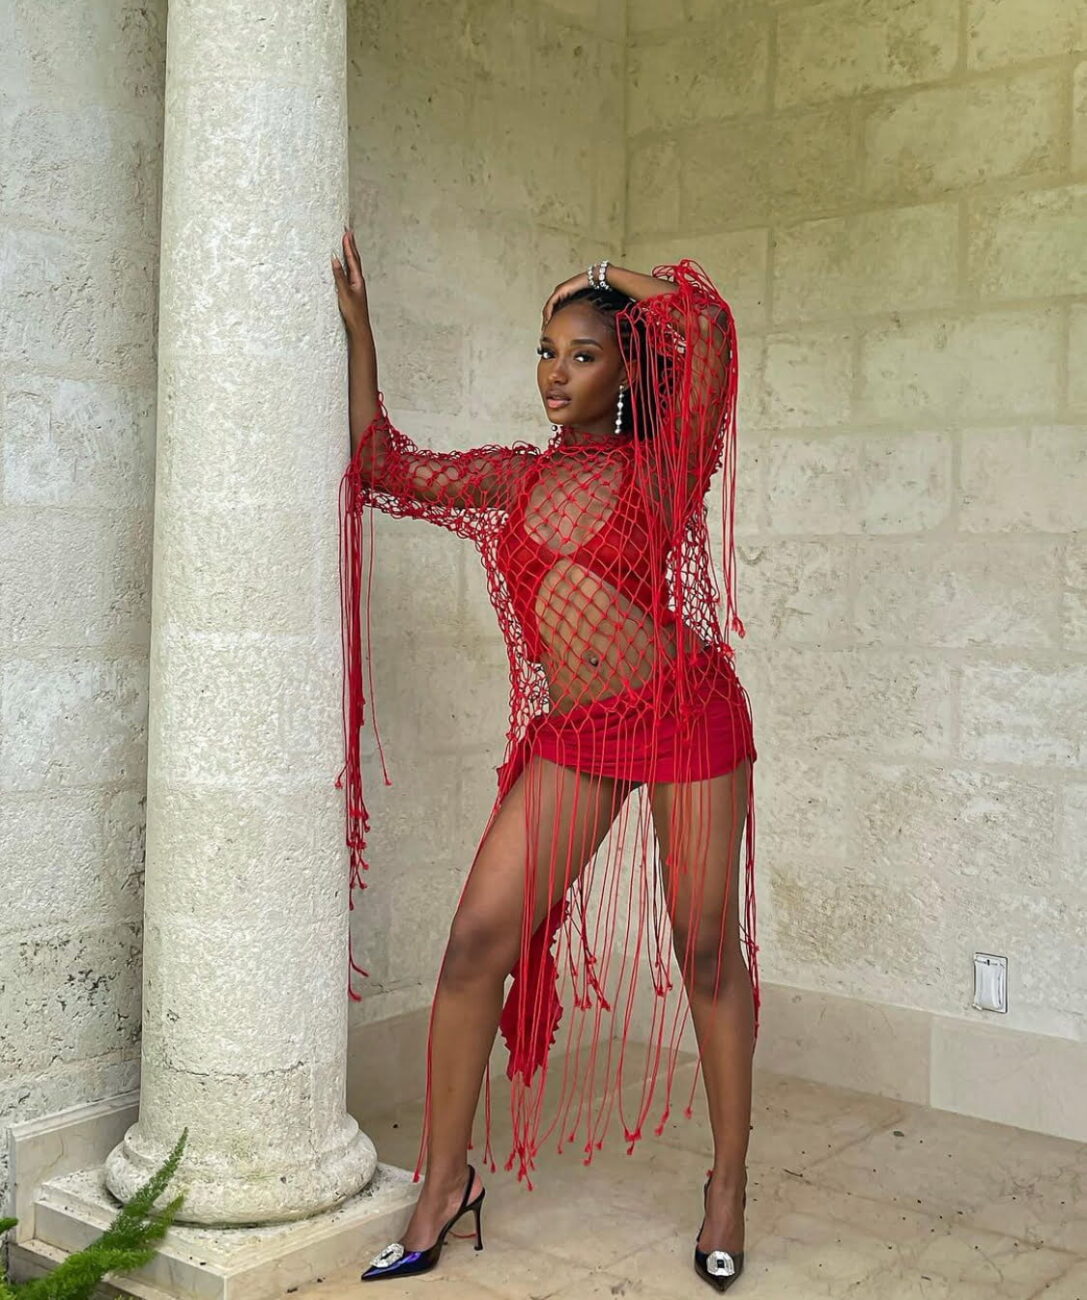 Fierce and bold: Ayra Starr slays in a red two piece outfit.